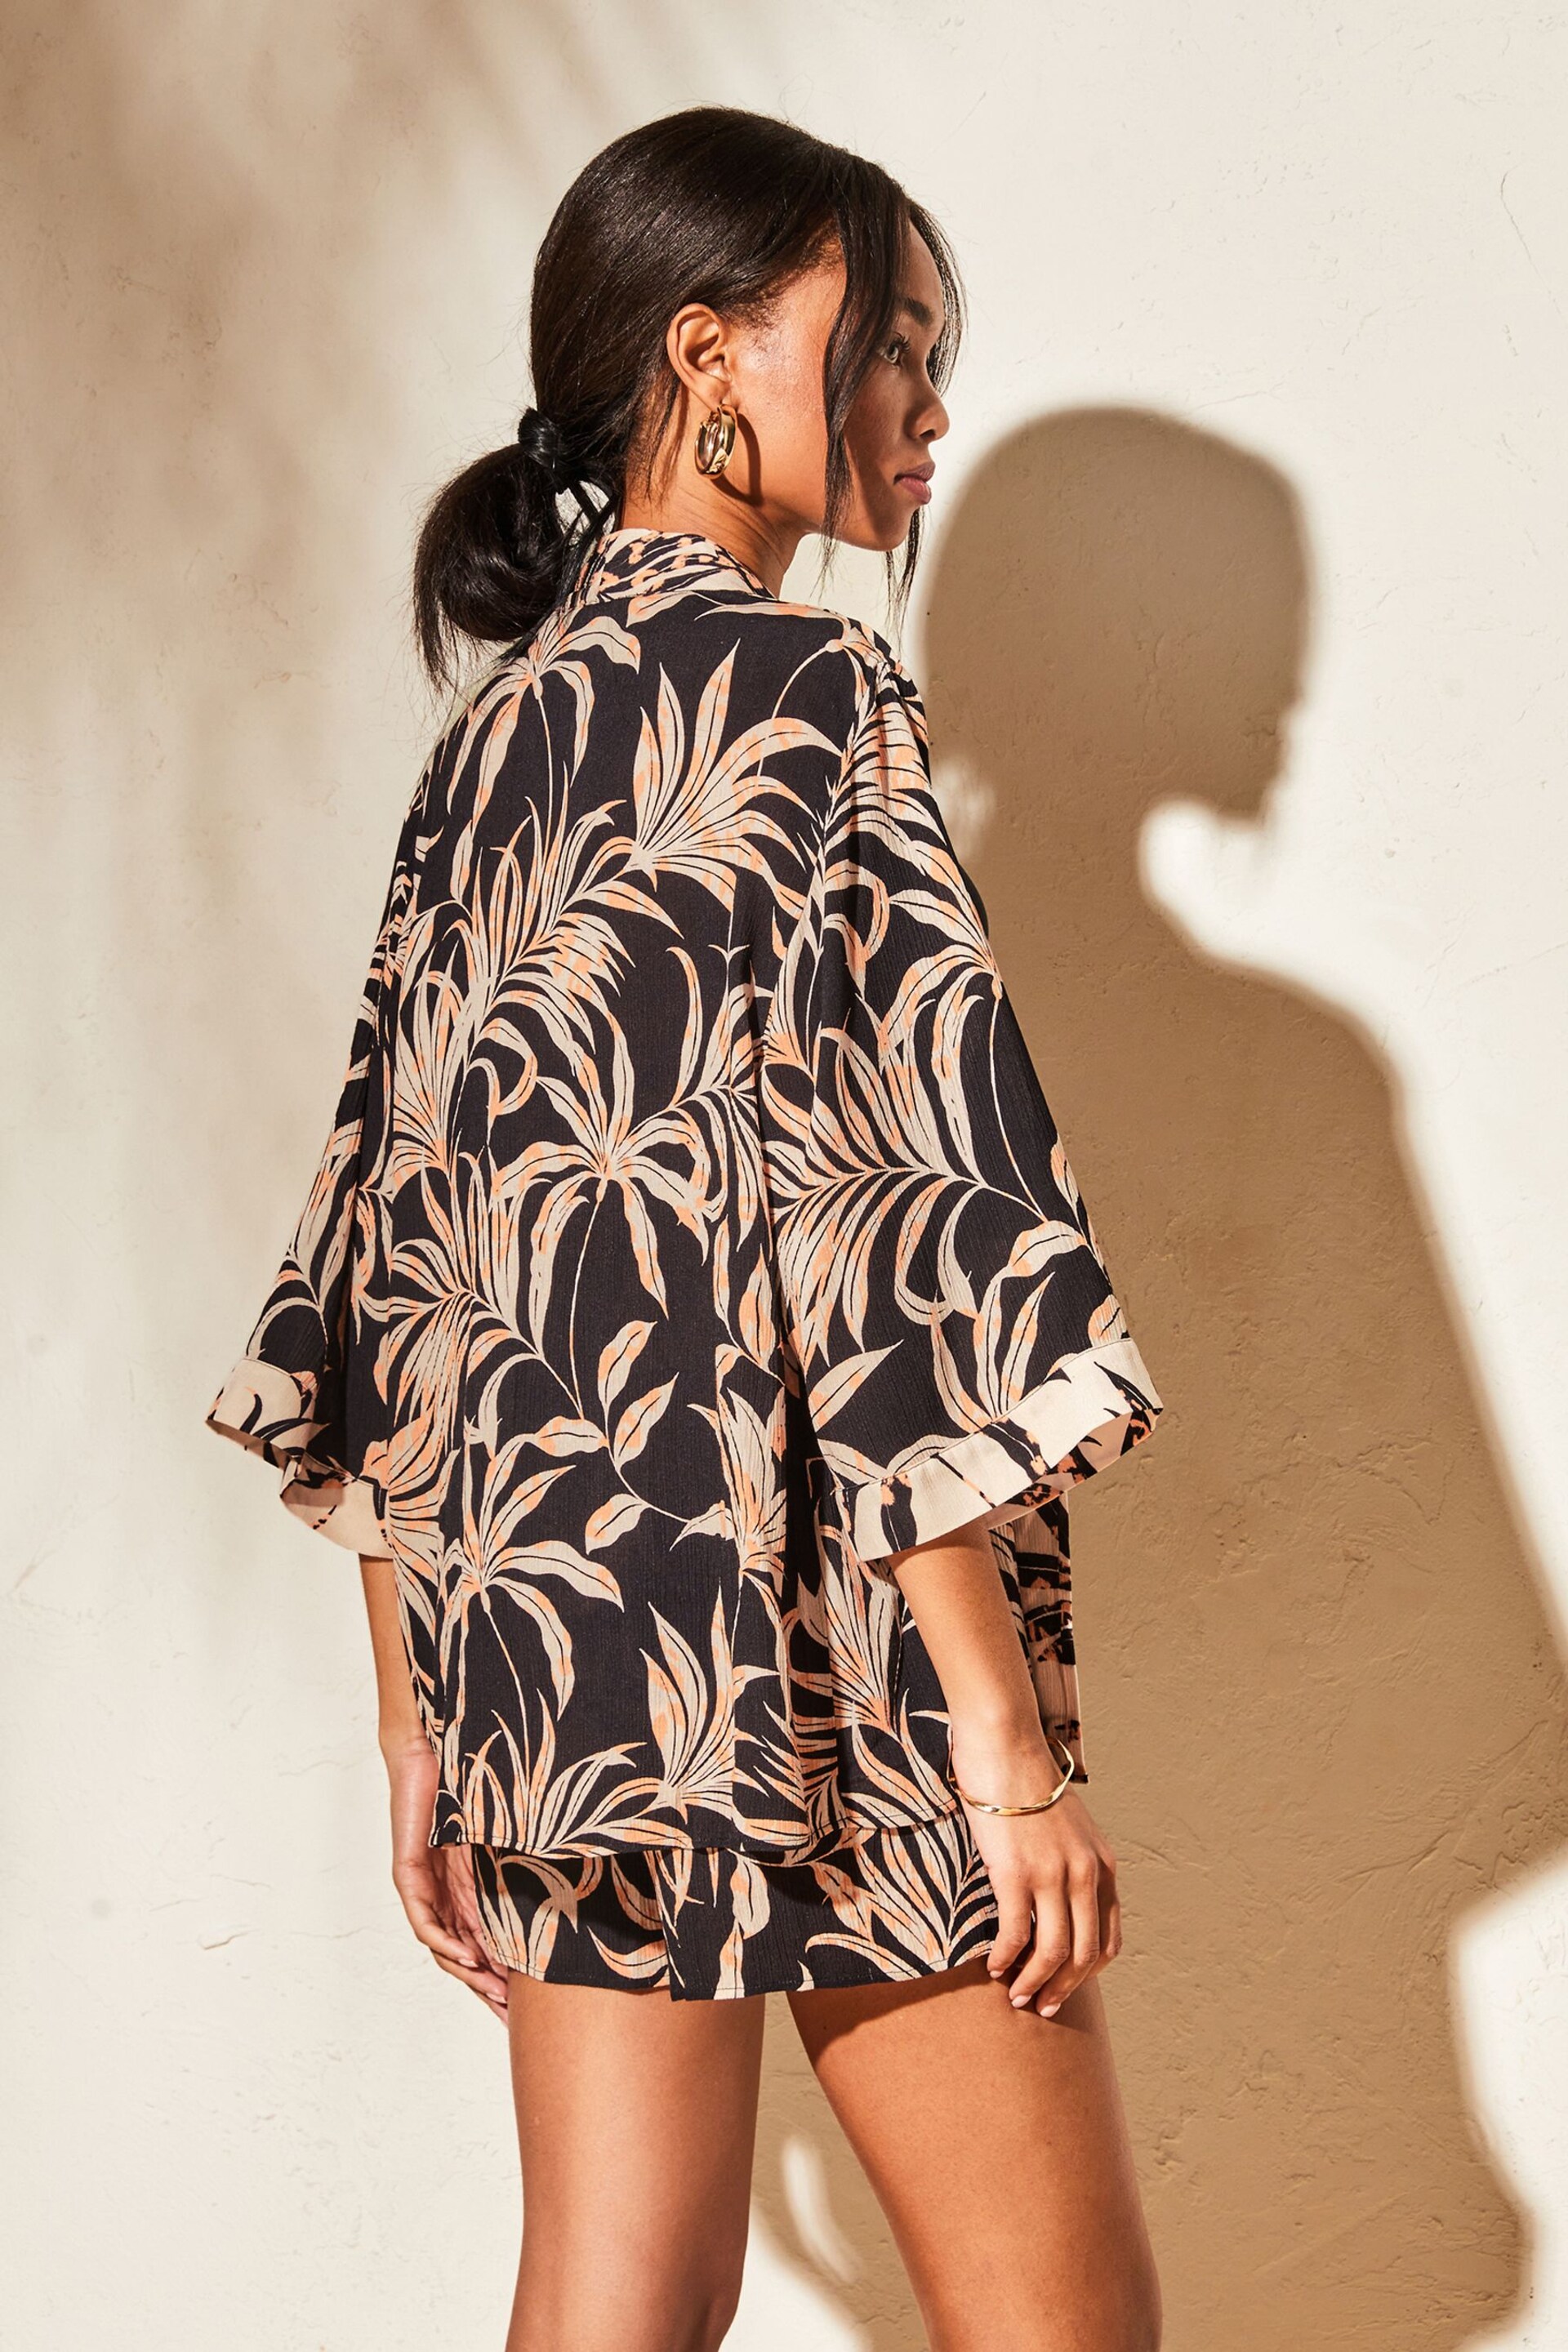 Lipsy Black Palm Printed Open Sleeved Kimono Cover up - Image 2 of 4